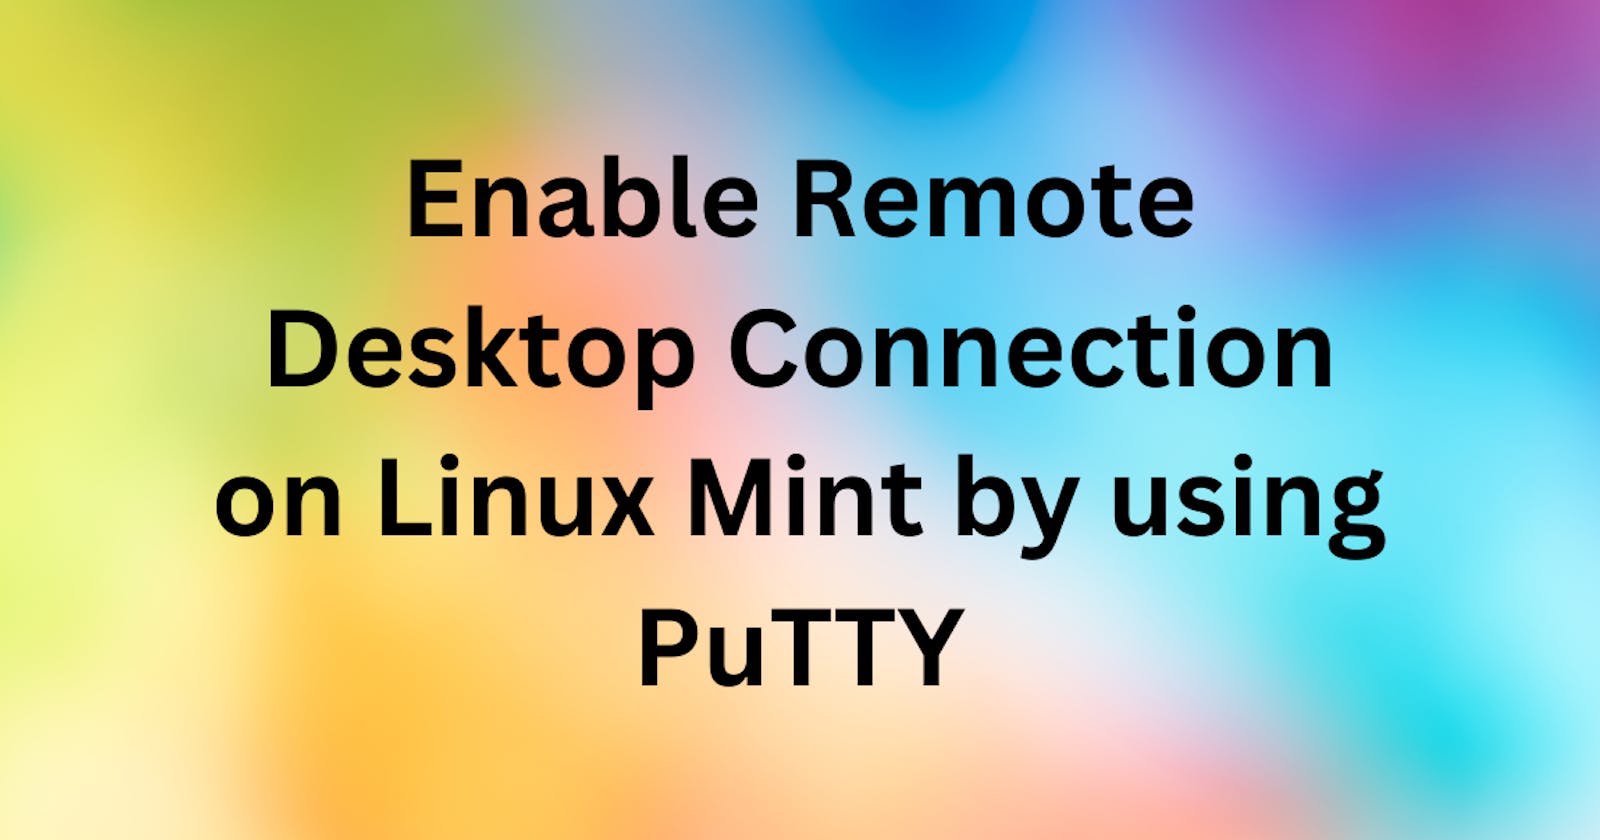 How to Enabling Remote Desktop Connections on Linux Mint using PuTTY?